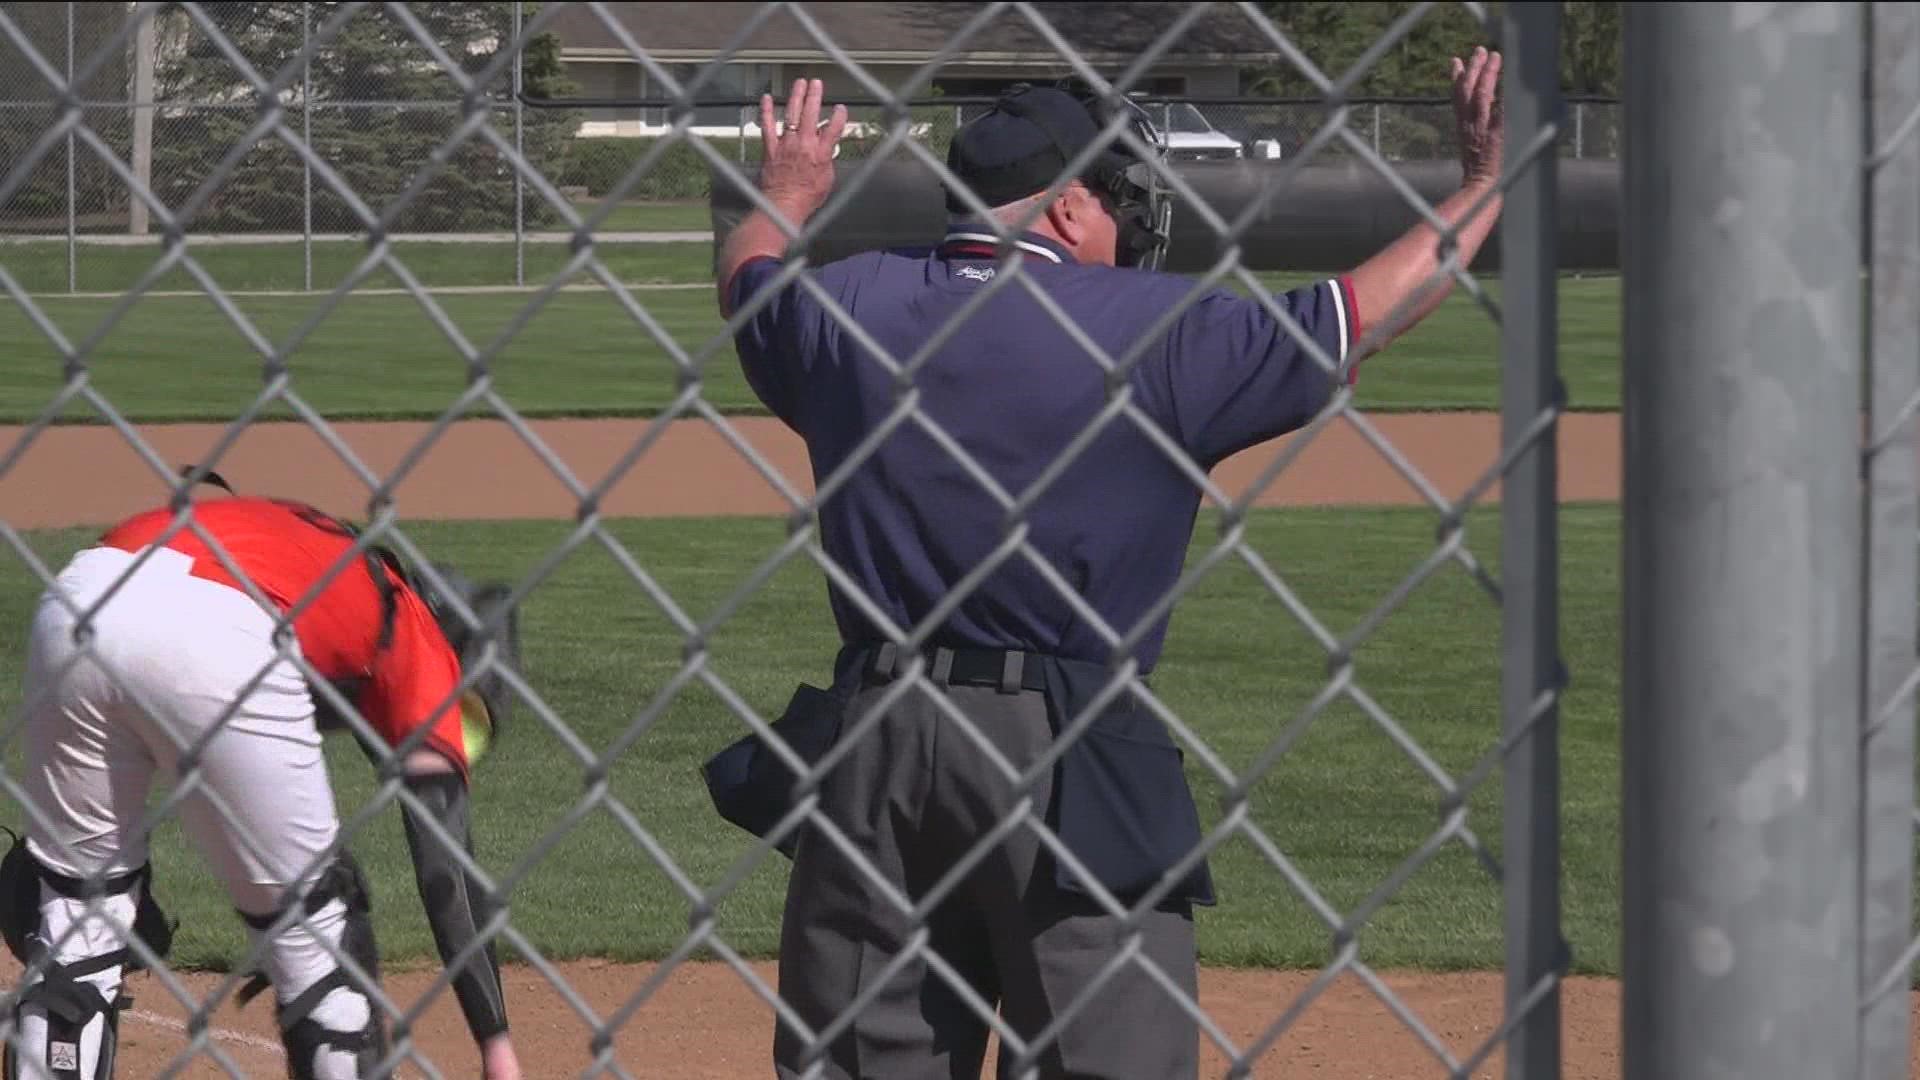 Whether it's the pay, the pressure or the parents, an umpire shortage is causing baseball games at all levels to get canceled.